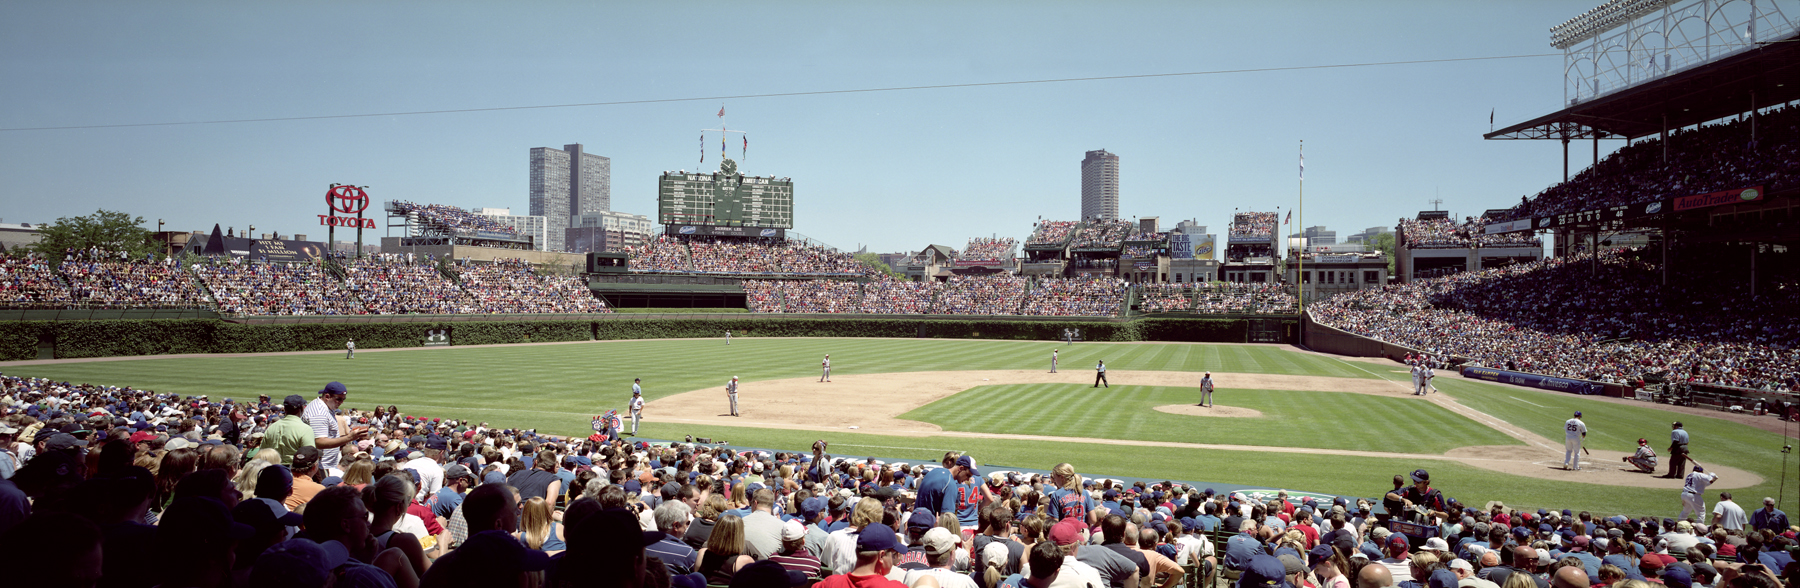 Free download Chicago Cubs Wallpaper of Wrigley Field Panoramic Cubs Vs  Reds [1800x588] for your Desktop, Mobile & Tablet | Explore 47+ Wrigley  Field Desktop Wallpaper | Field Wallpaper, Hyrule Field Wallpaper,